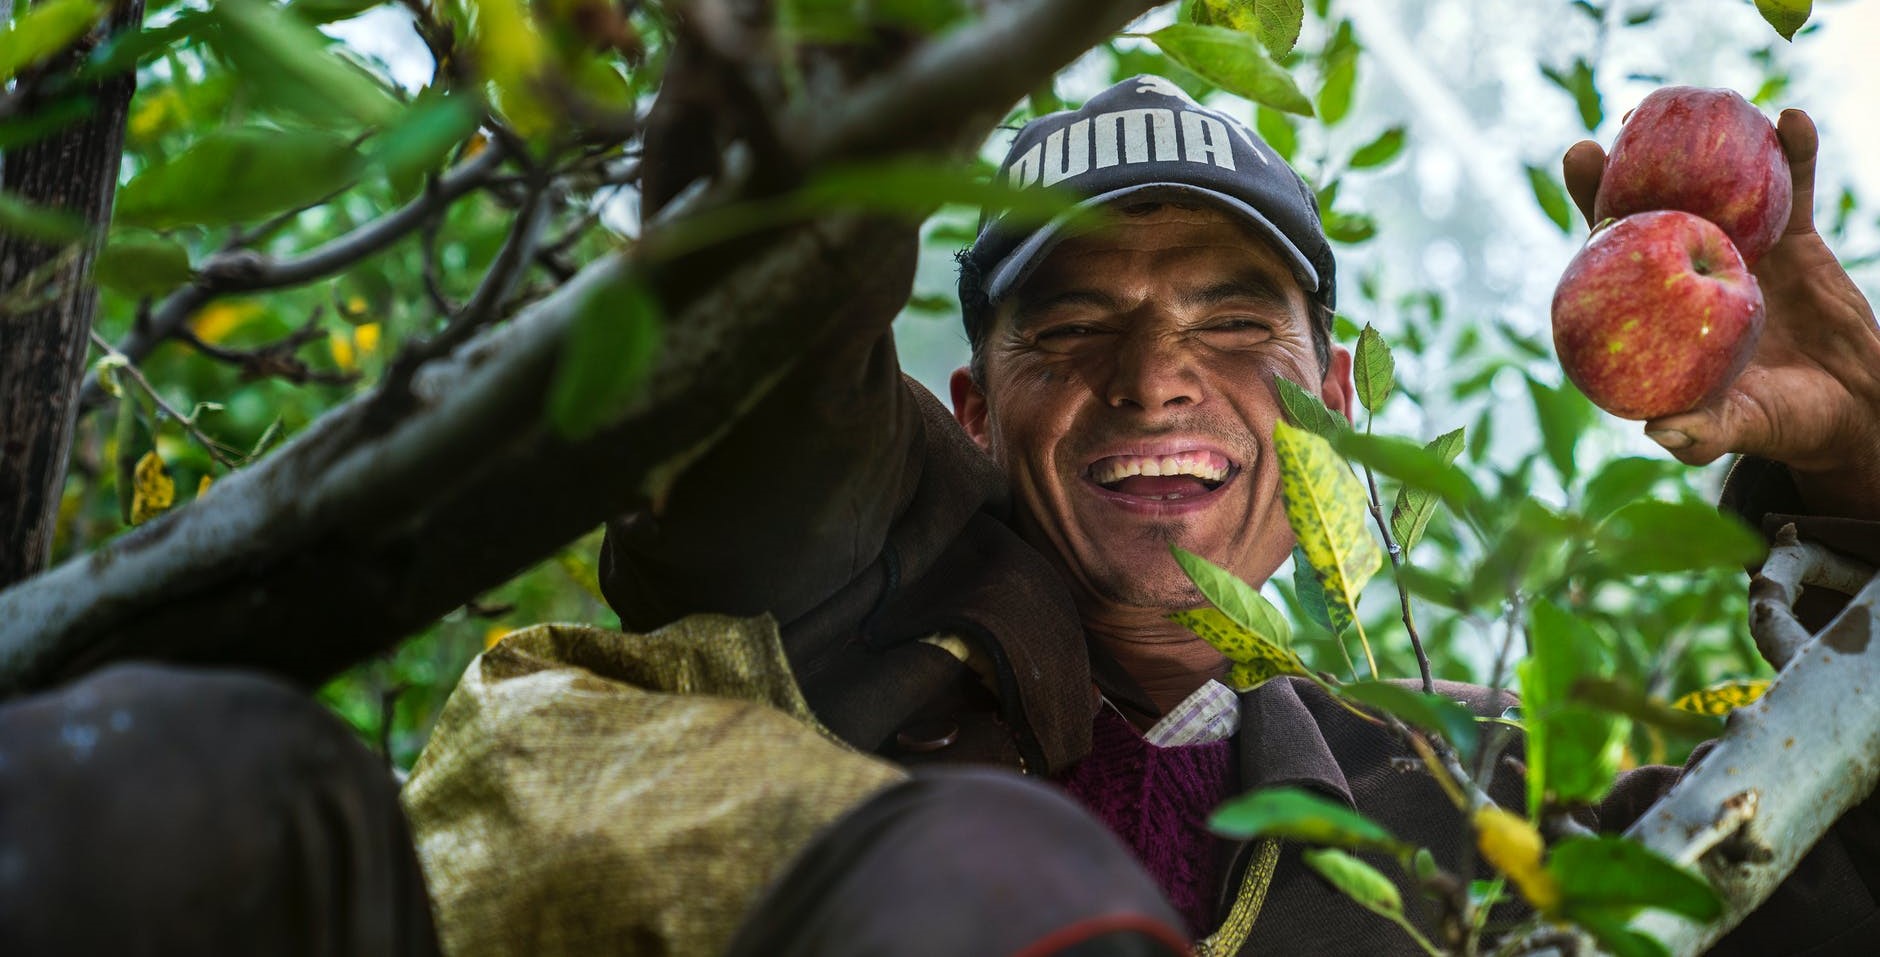 Smiling farm worker picking apples.